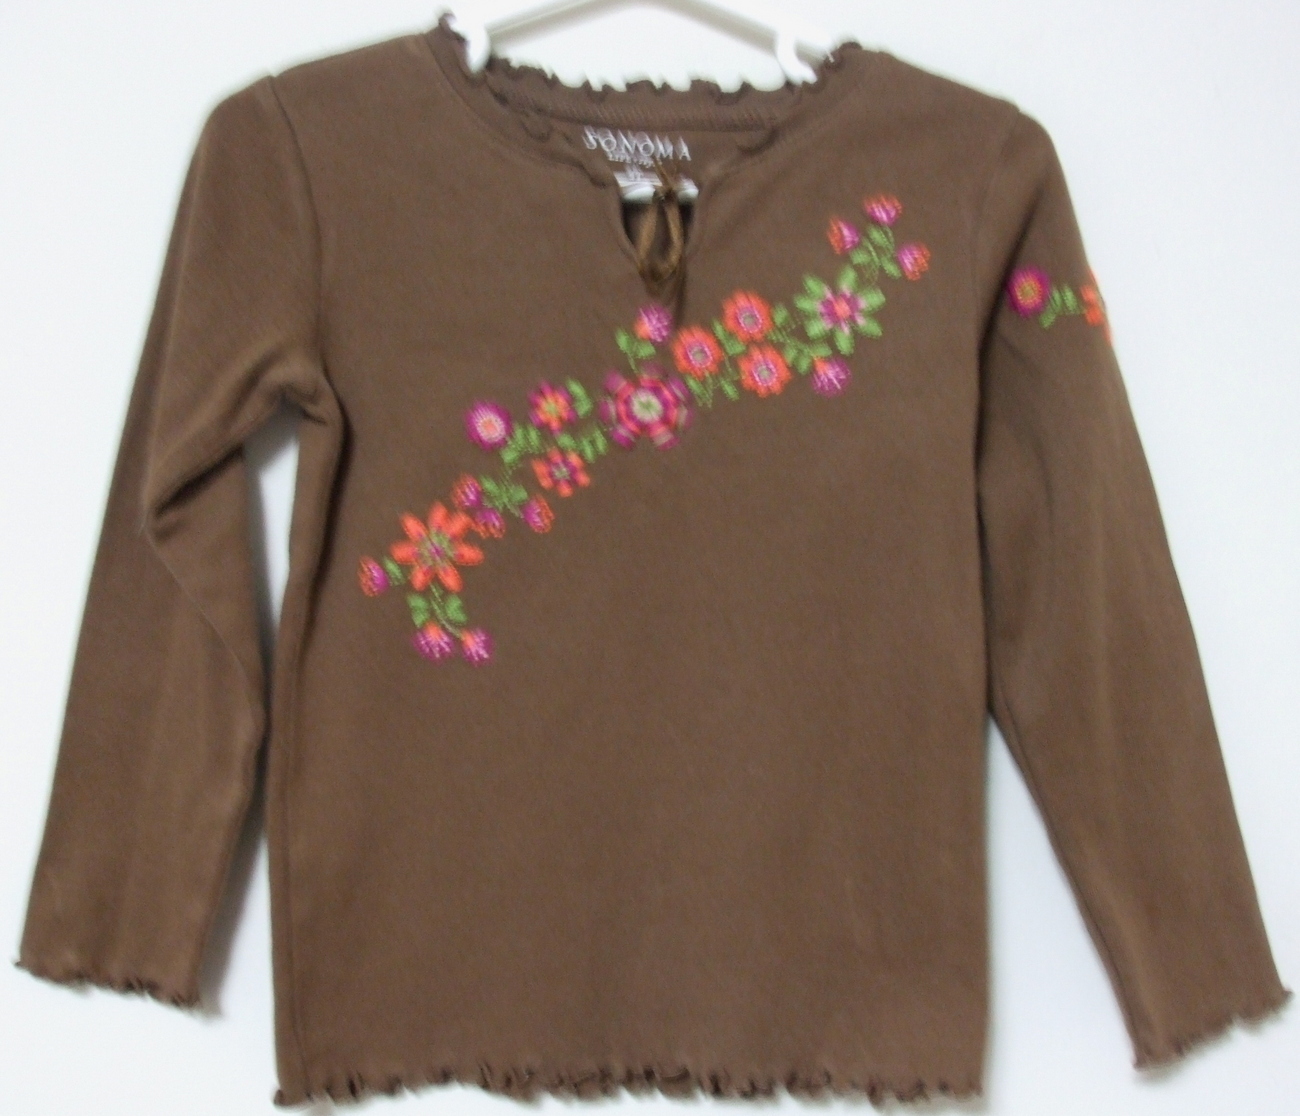 Toddler Girls Sonoma Brown Long Sleeve Cotton Top Size 4T - $4.95